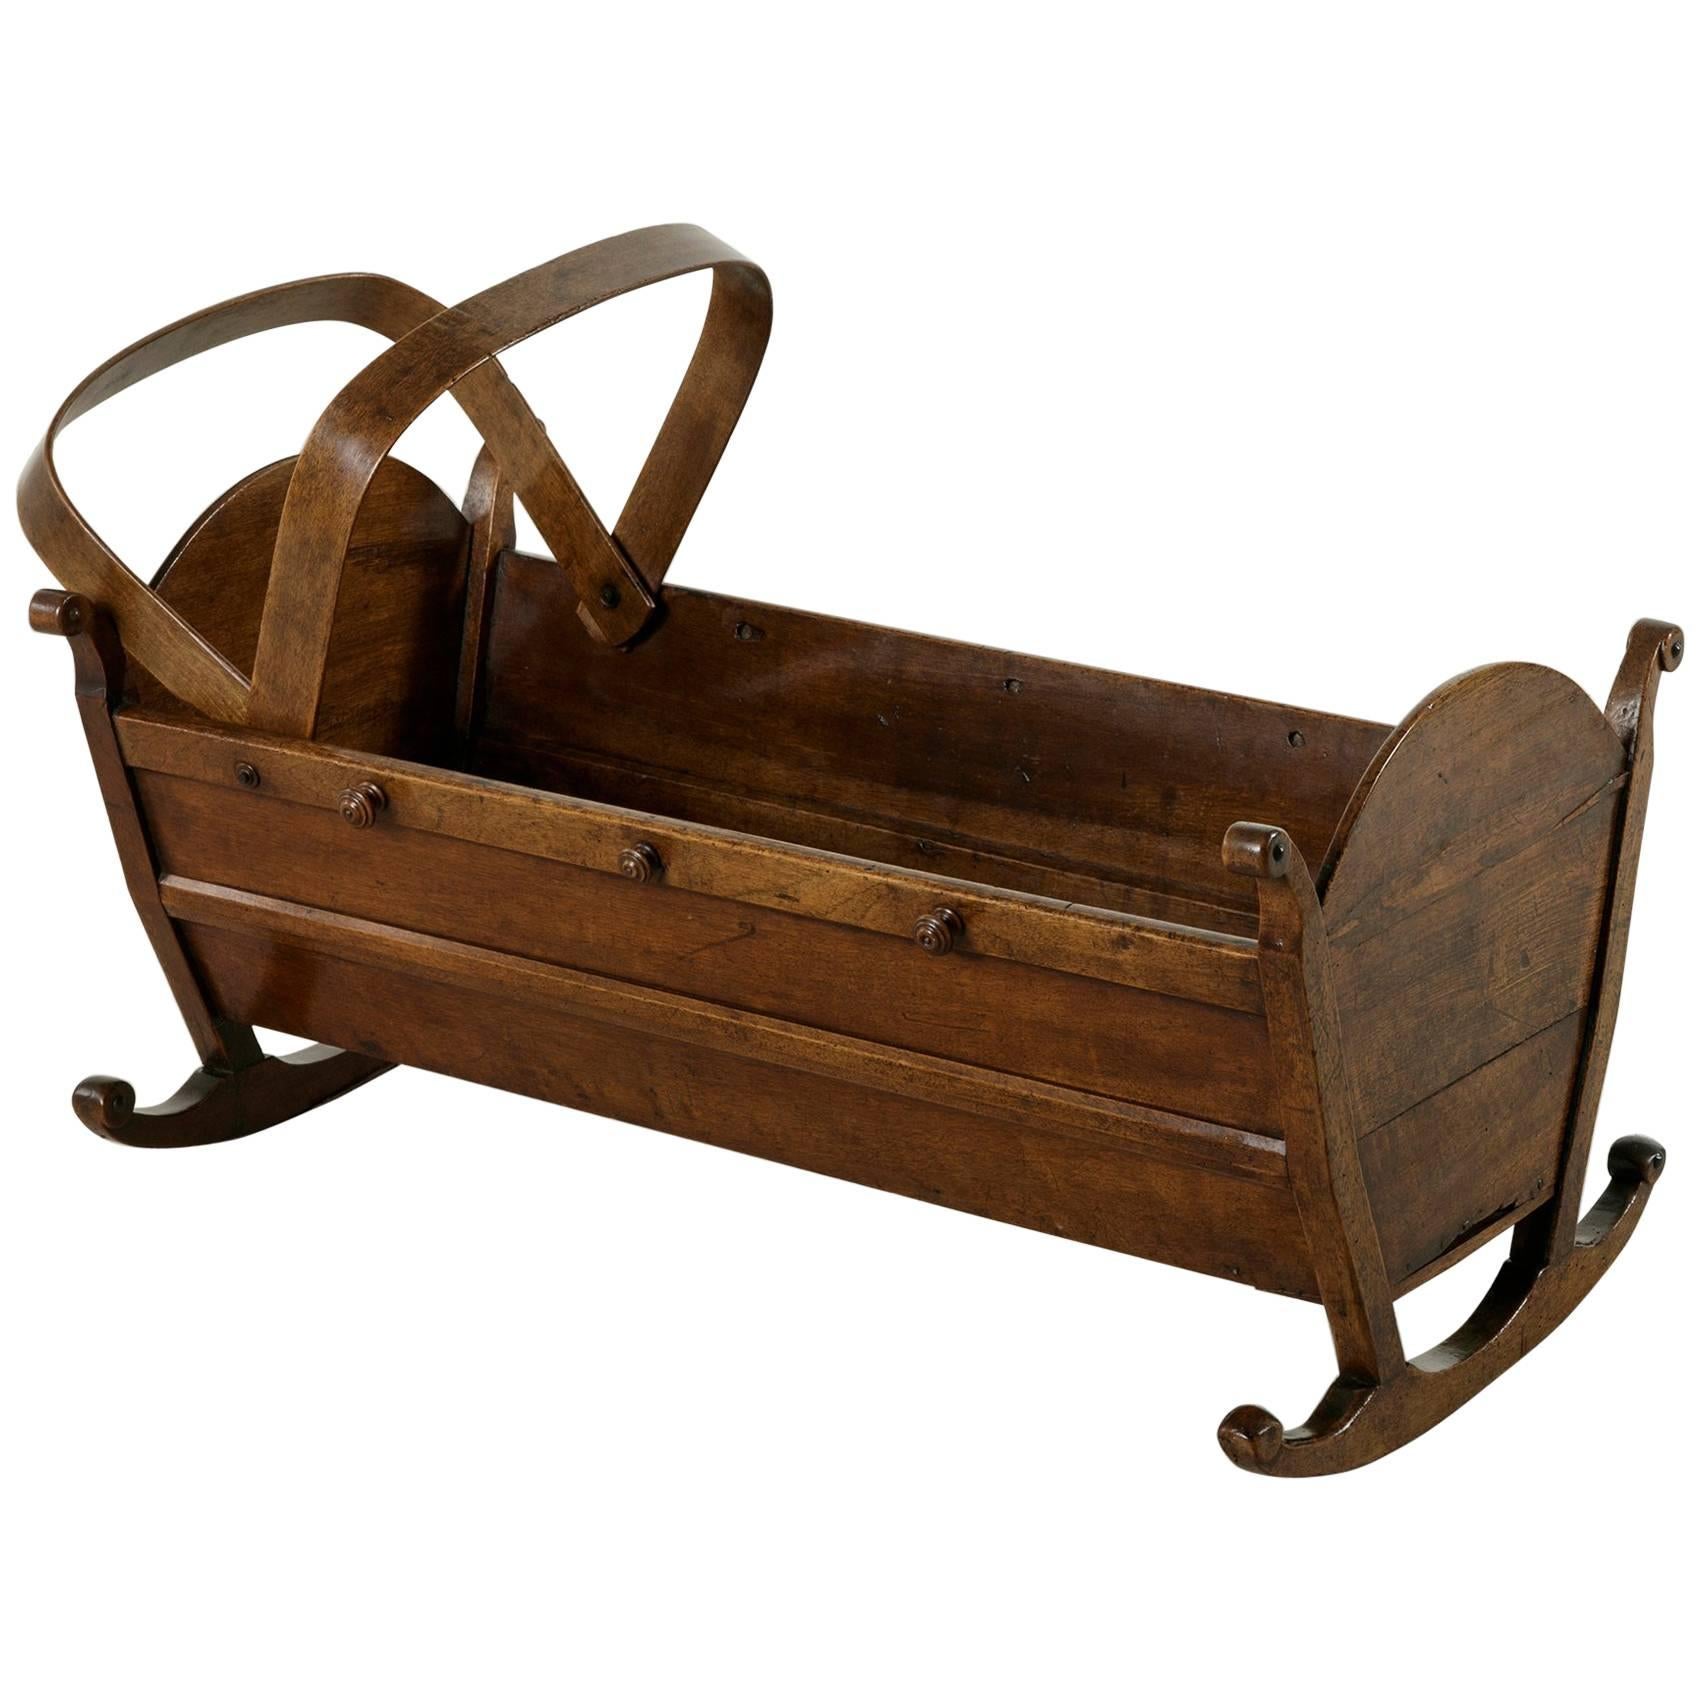 Mid-19th Century French Hand-Carved Artisan-Made Walnut Cradle